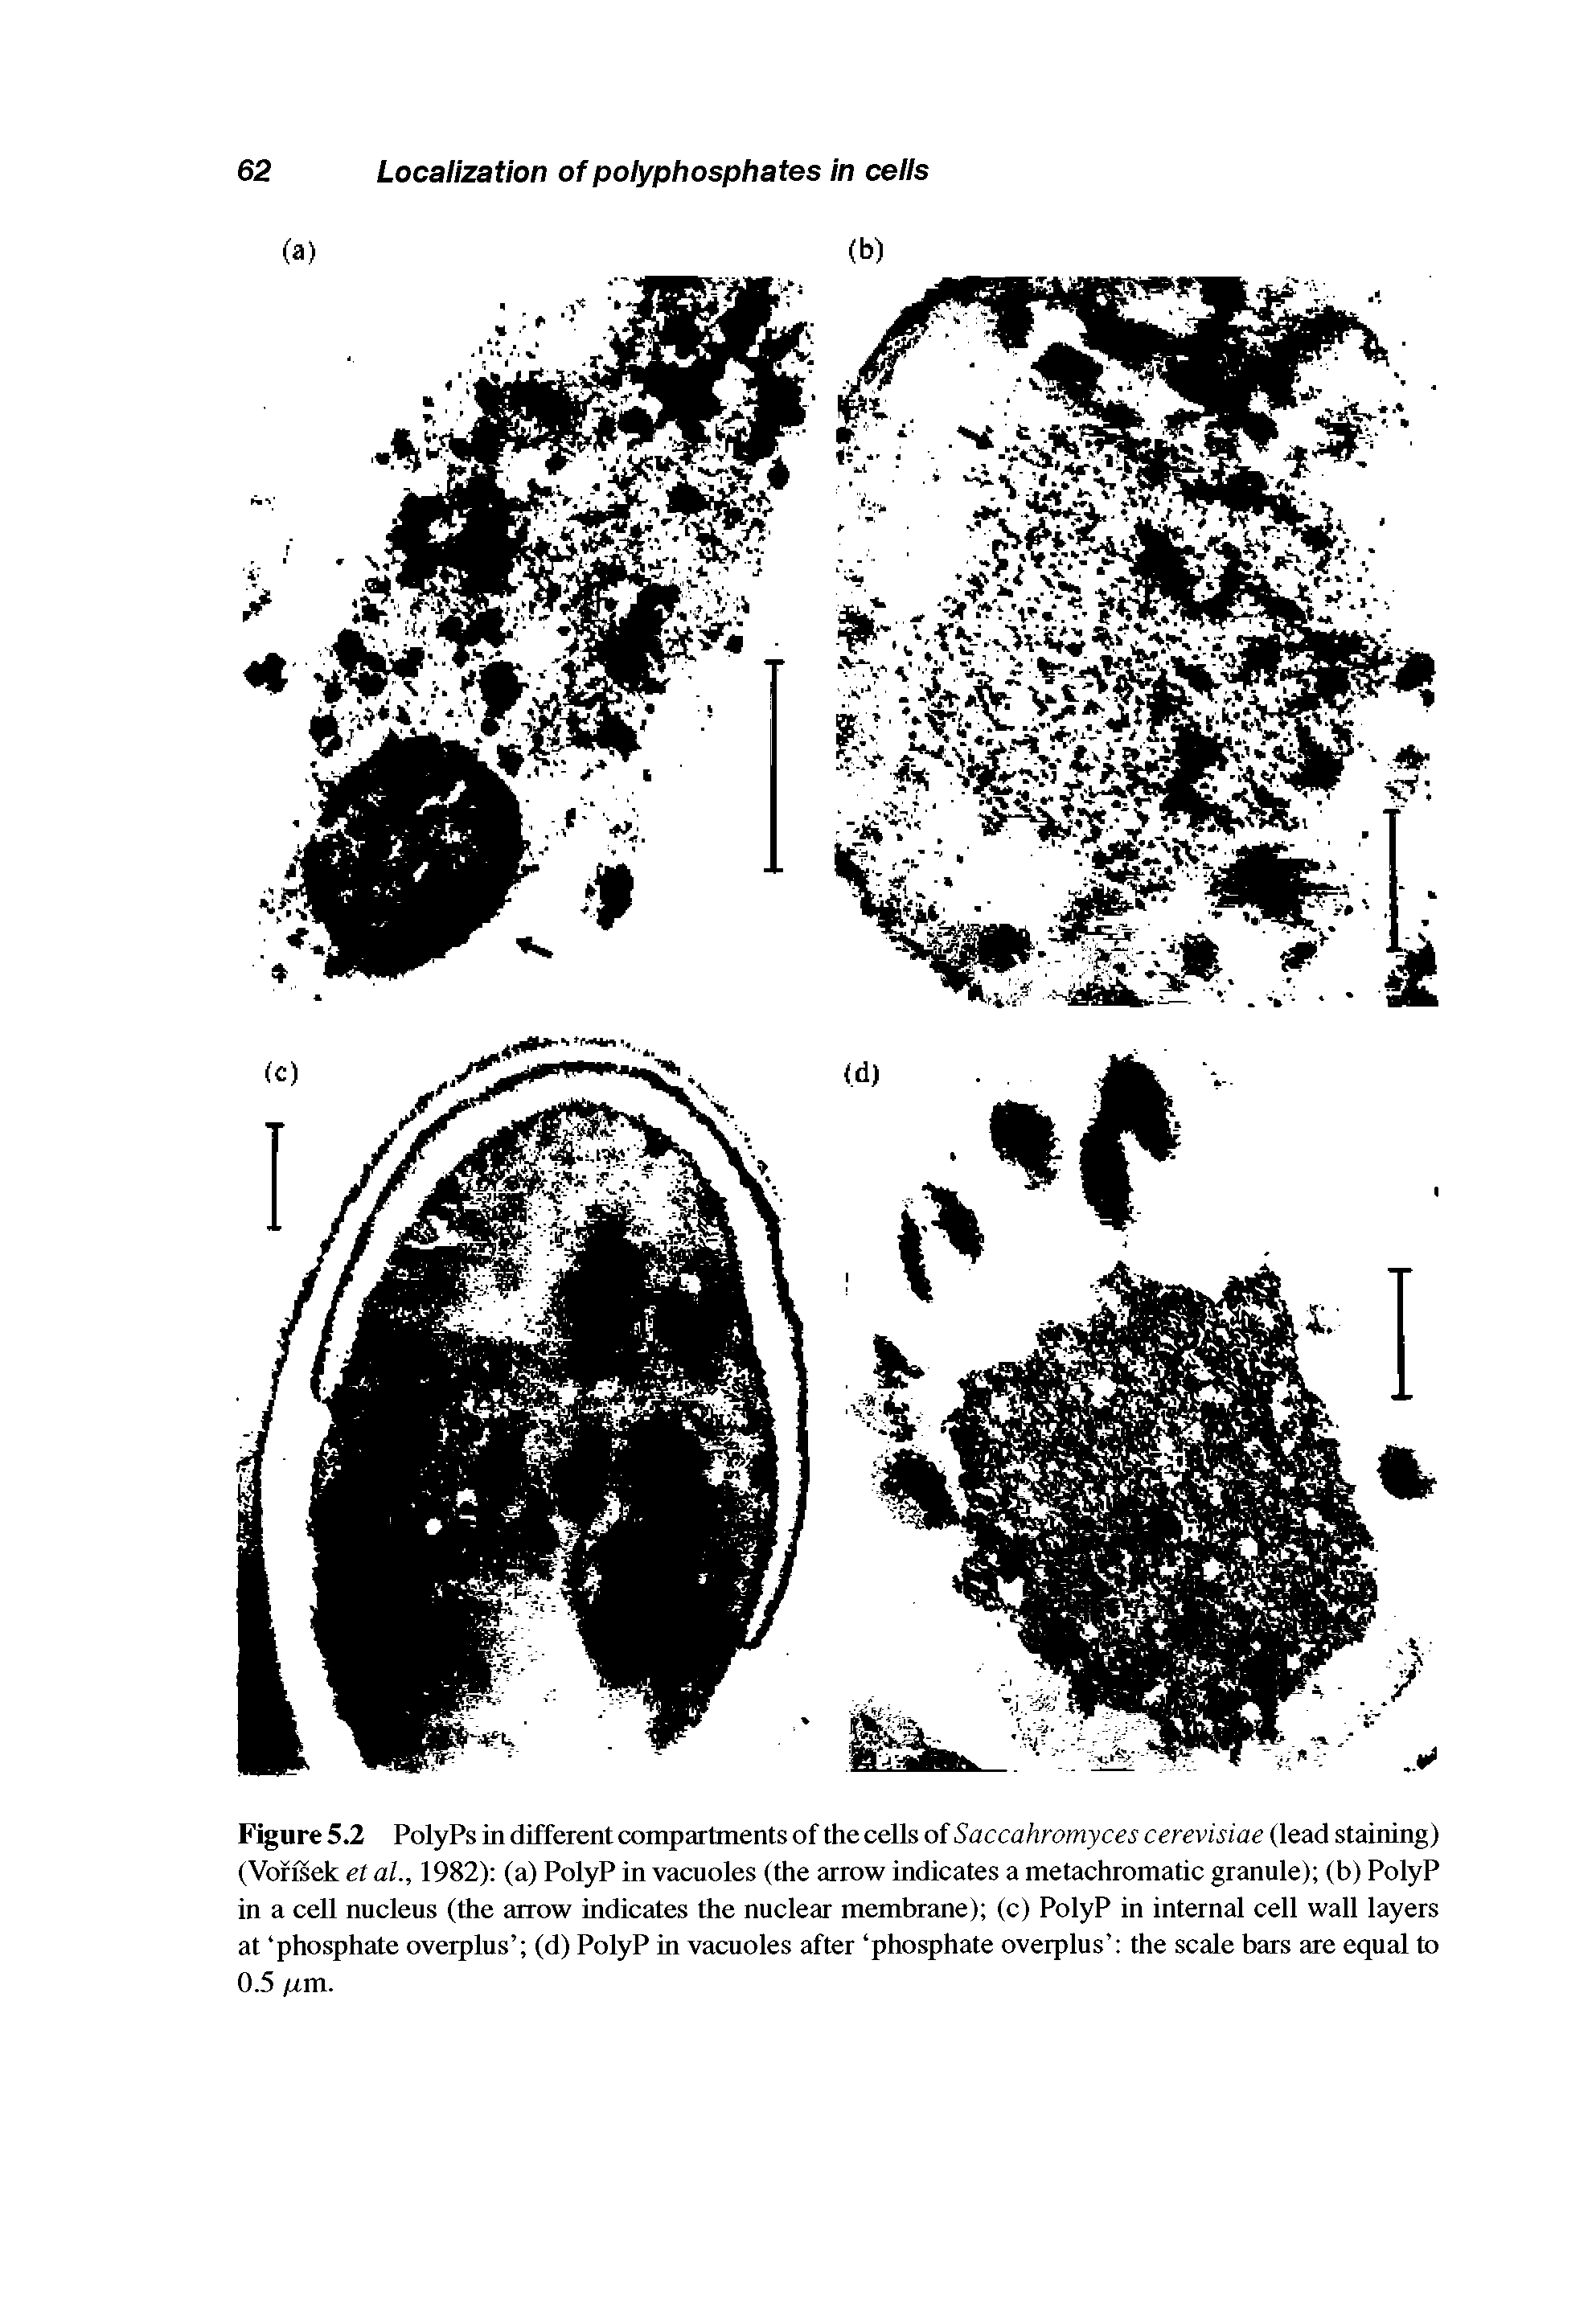 Figure 5.2 PolyPs in different compartments of the cells of Saccahromyces cerevisiae (lead staining) (Vorfiek et al., 1982) (a) PolyP in vacuoles (the arrow indicates a metachromatic granule) (b) PolyP in a cell nucleus (the arrow indicates the nuclear membrane) (c) PolyP in internal cell wall layers at phosphate overplus (d) PolyP in vacuoles after phosphate overplus the scale bars are equal to 0.5 /xm.